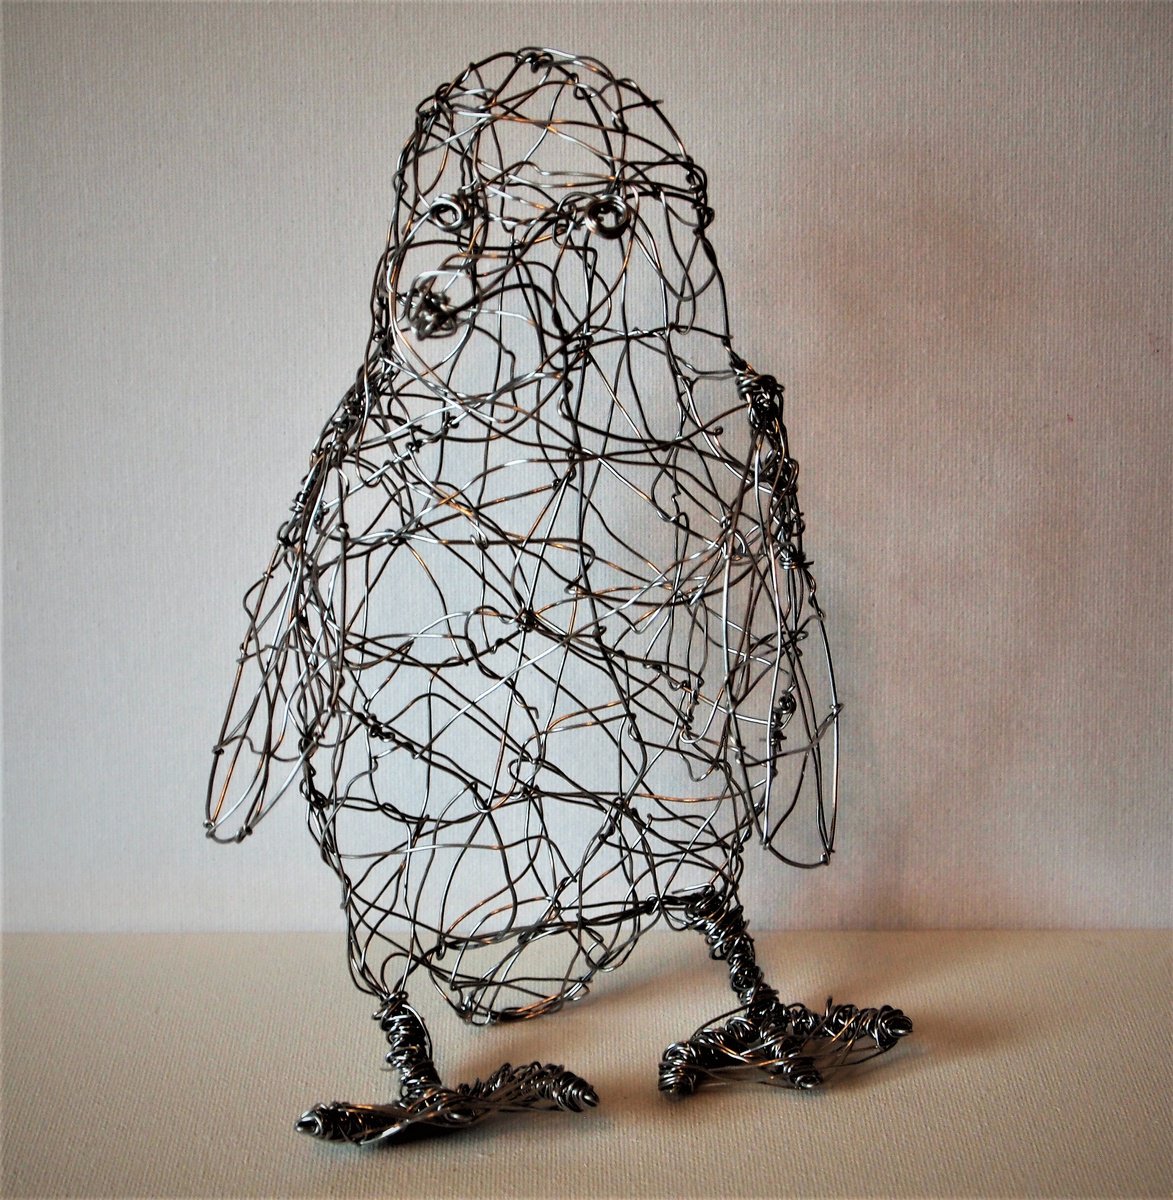 Silver wire Poppy Penguin sculpture by Steph Morgan